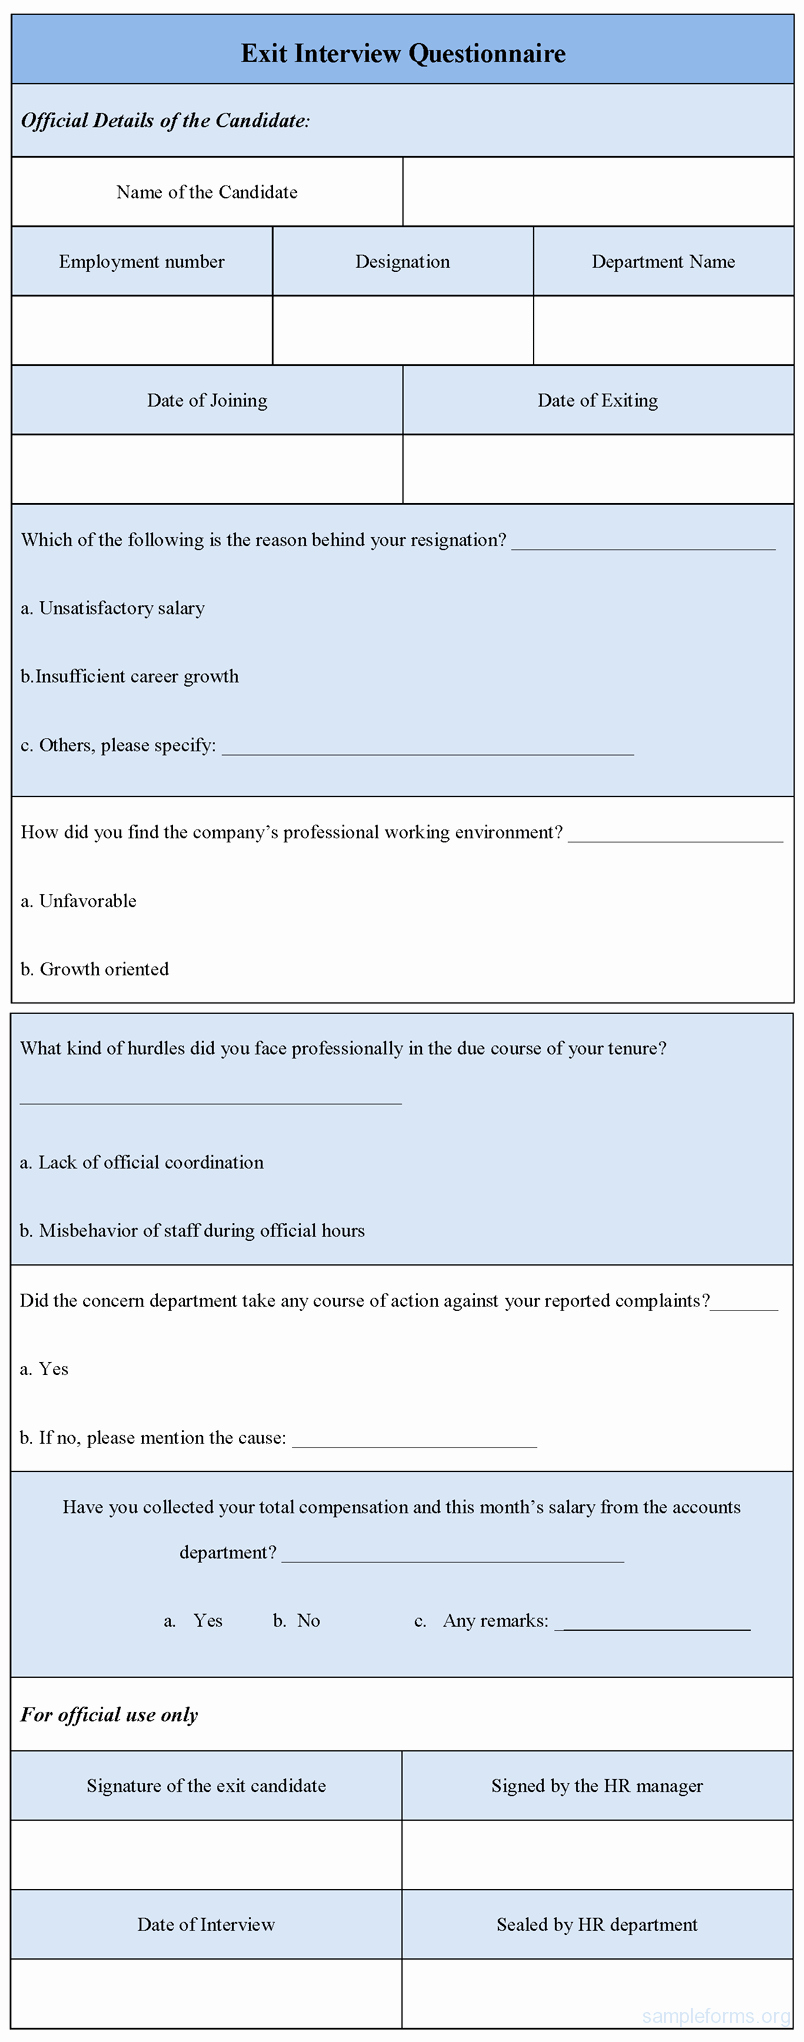 Sample Exit Interview form Beautiful Exit Interview Questionnaire form Sample forms